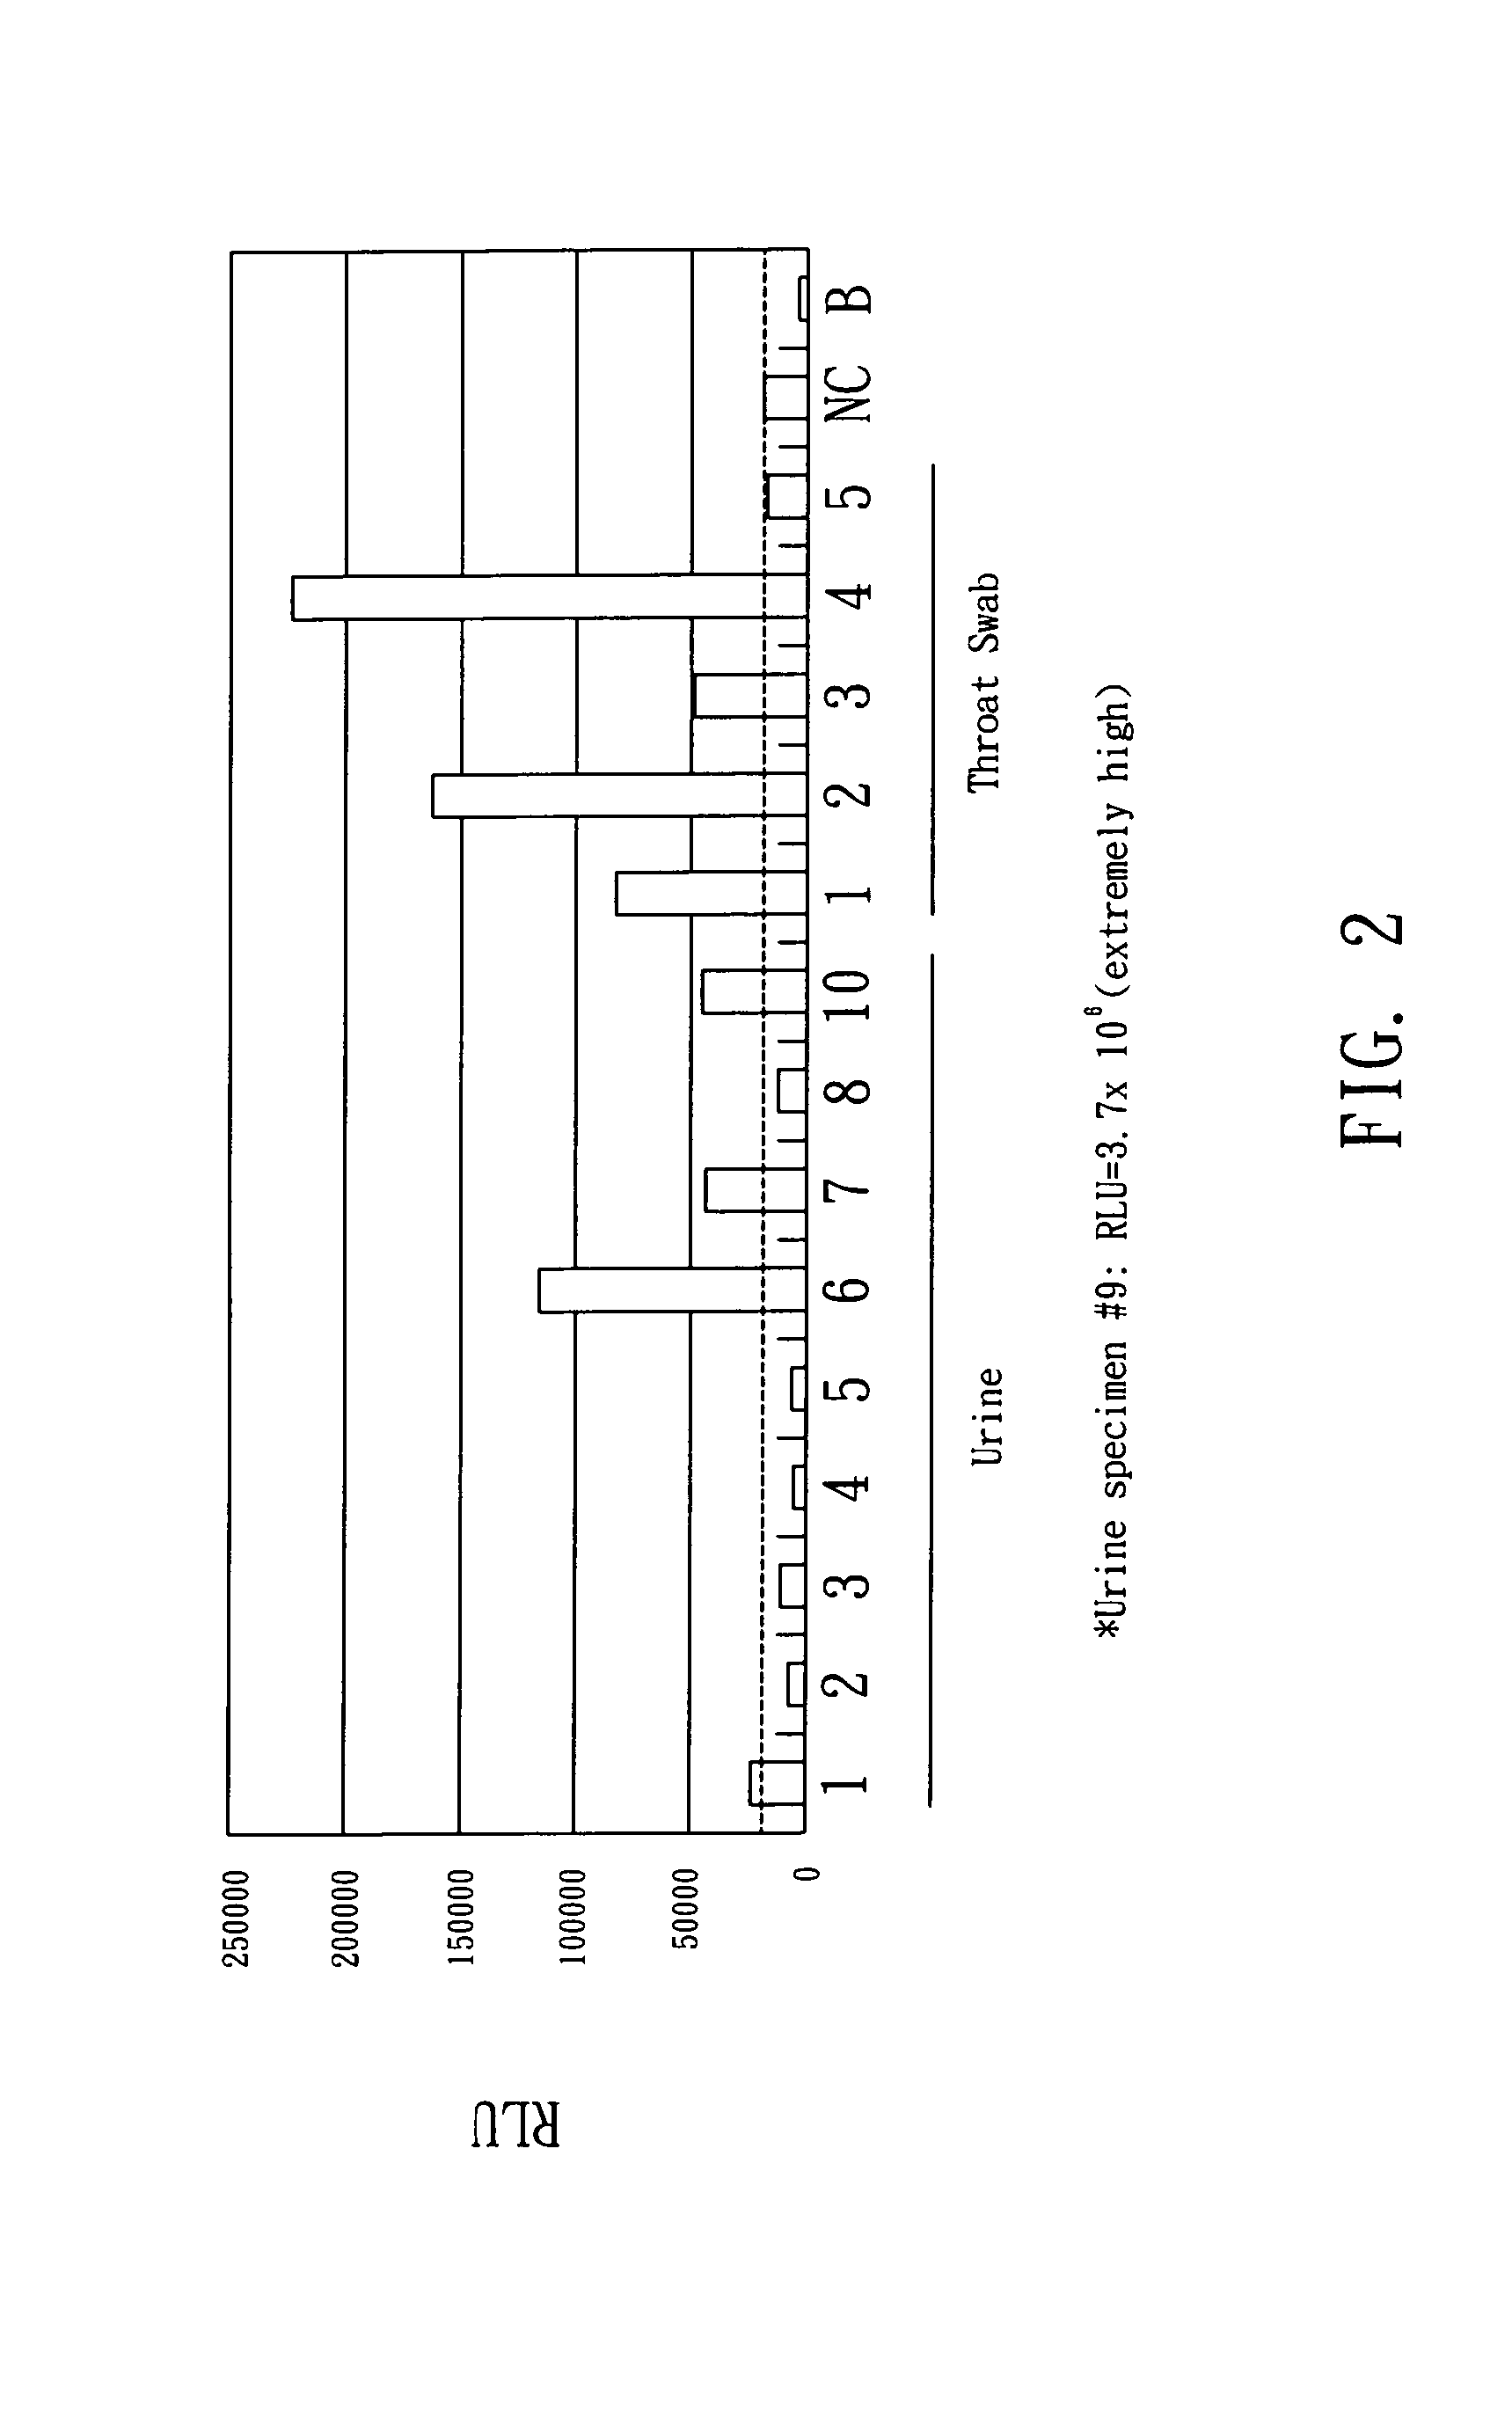 Assay system and methods for detecting SARS-CV